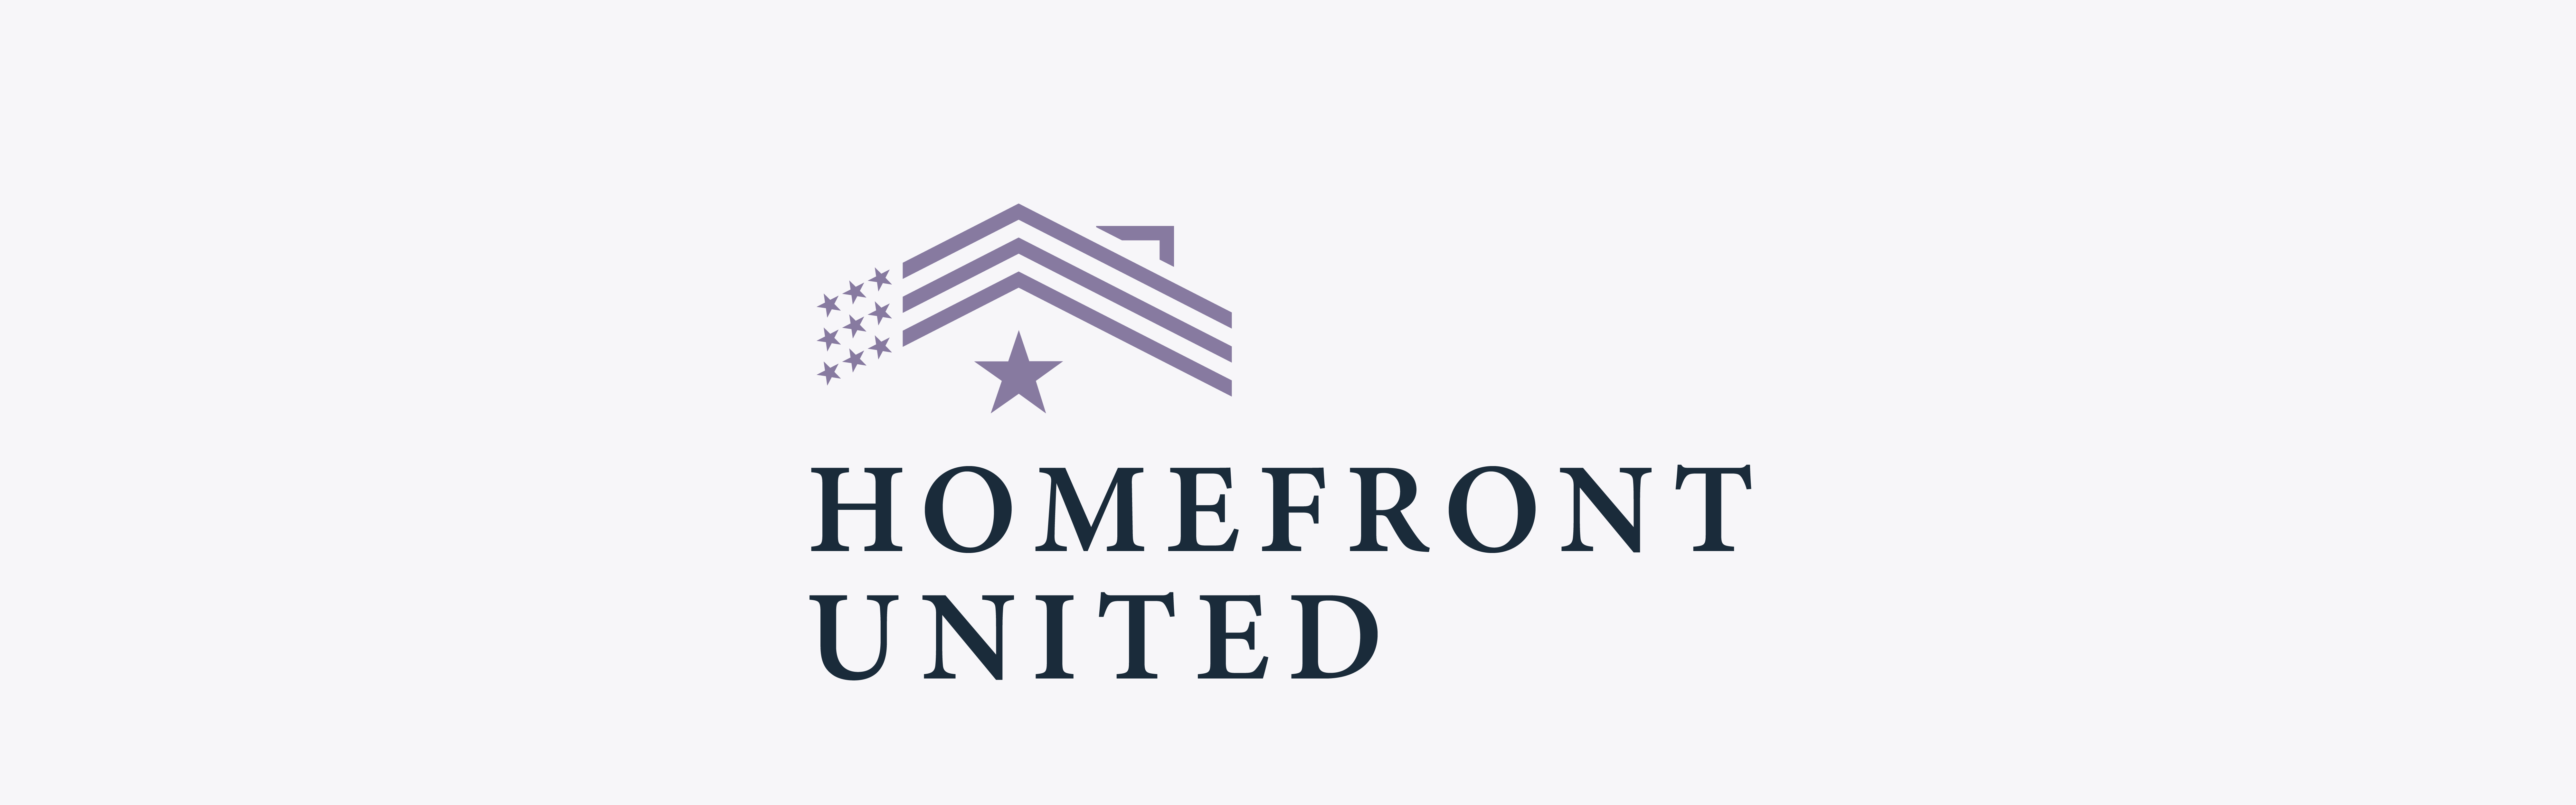 Logo of Homefront United featuring a stylized house with an American flag motif above the words 'Homefront United'.